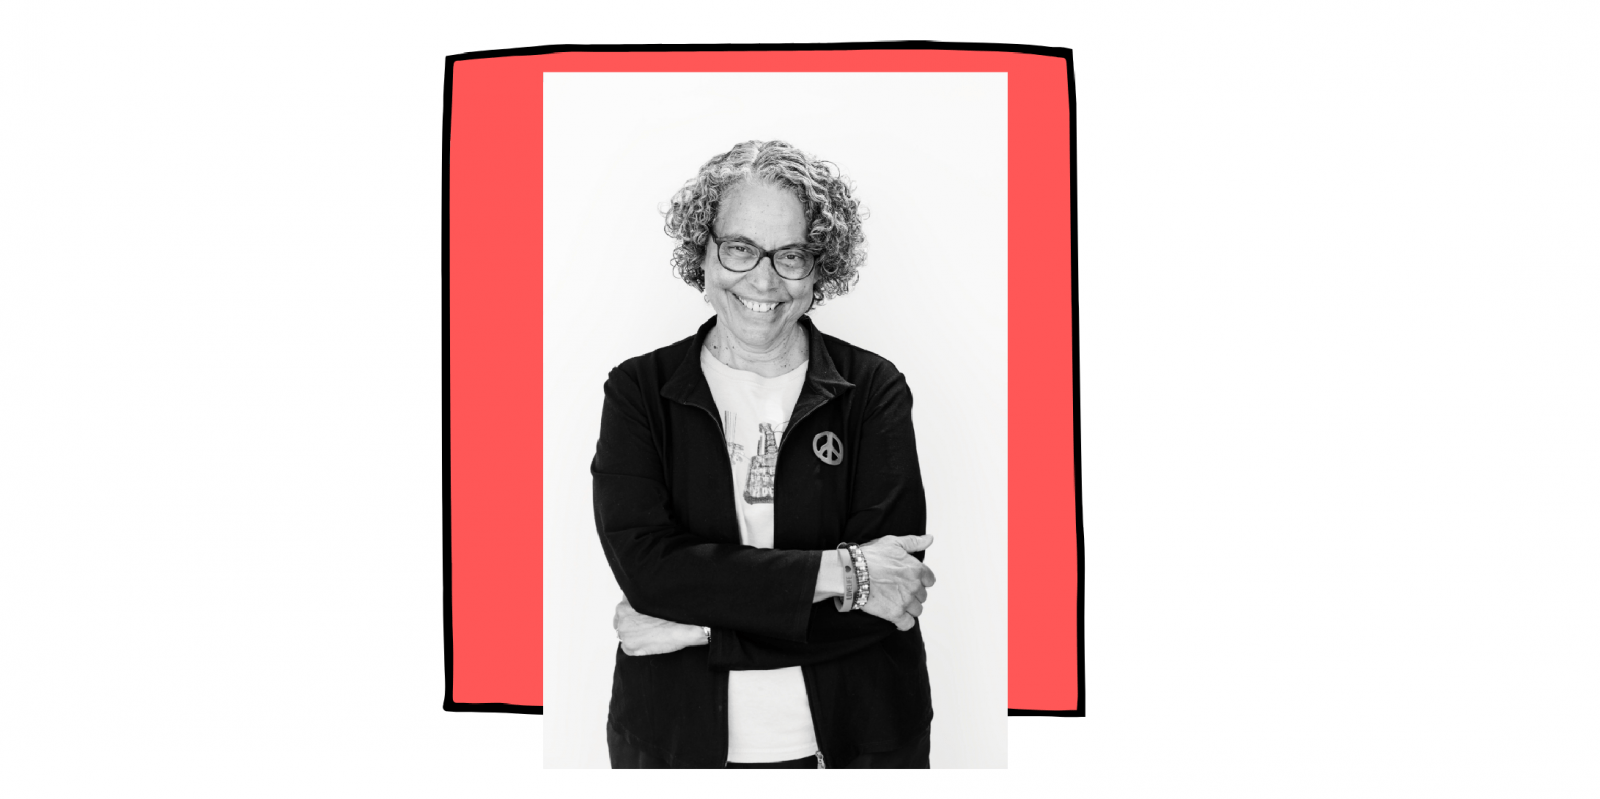 Black and white headshot of Dr. Mindy Fullilove, with a pink graphic square as a background.